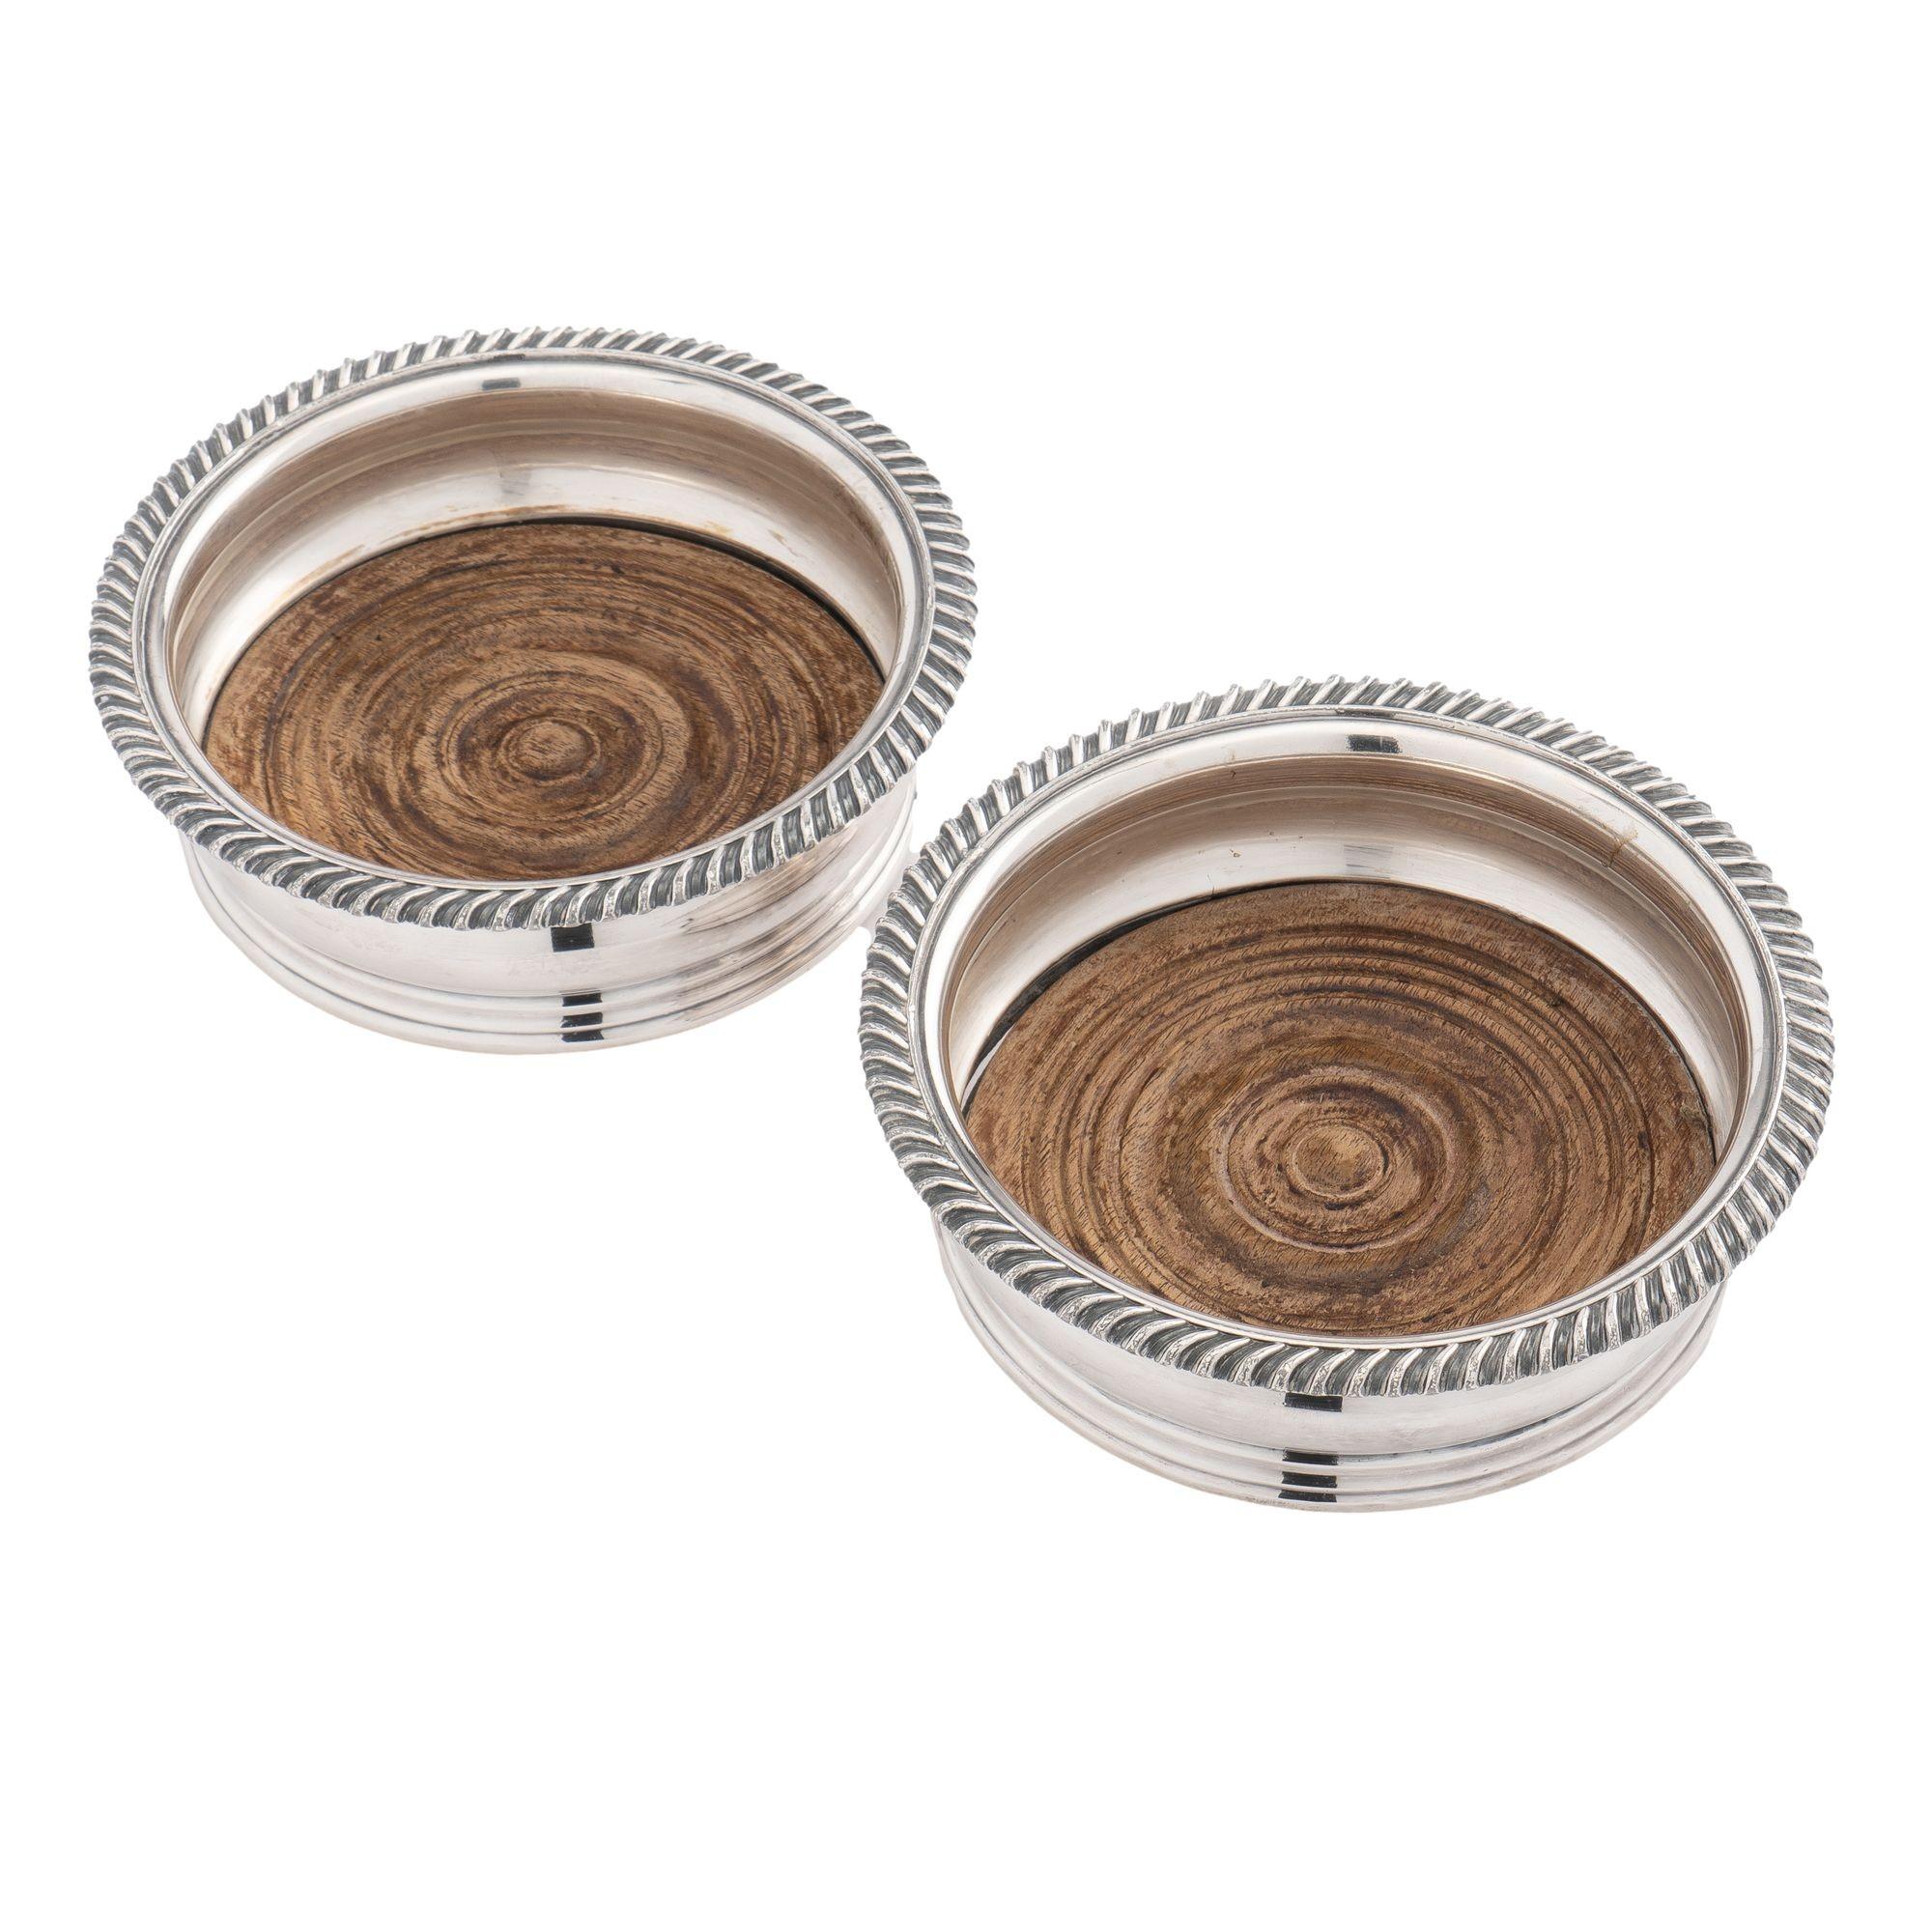 Pair of Sheffield silver wine coasters with cast gadroon edges on Bombay sides. Fitted with a turned wood base on a green baize footing.
England, circa 1830.